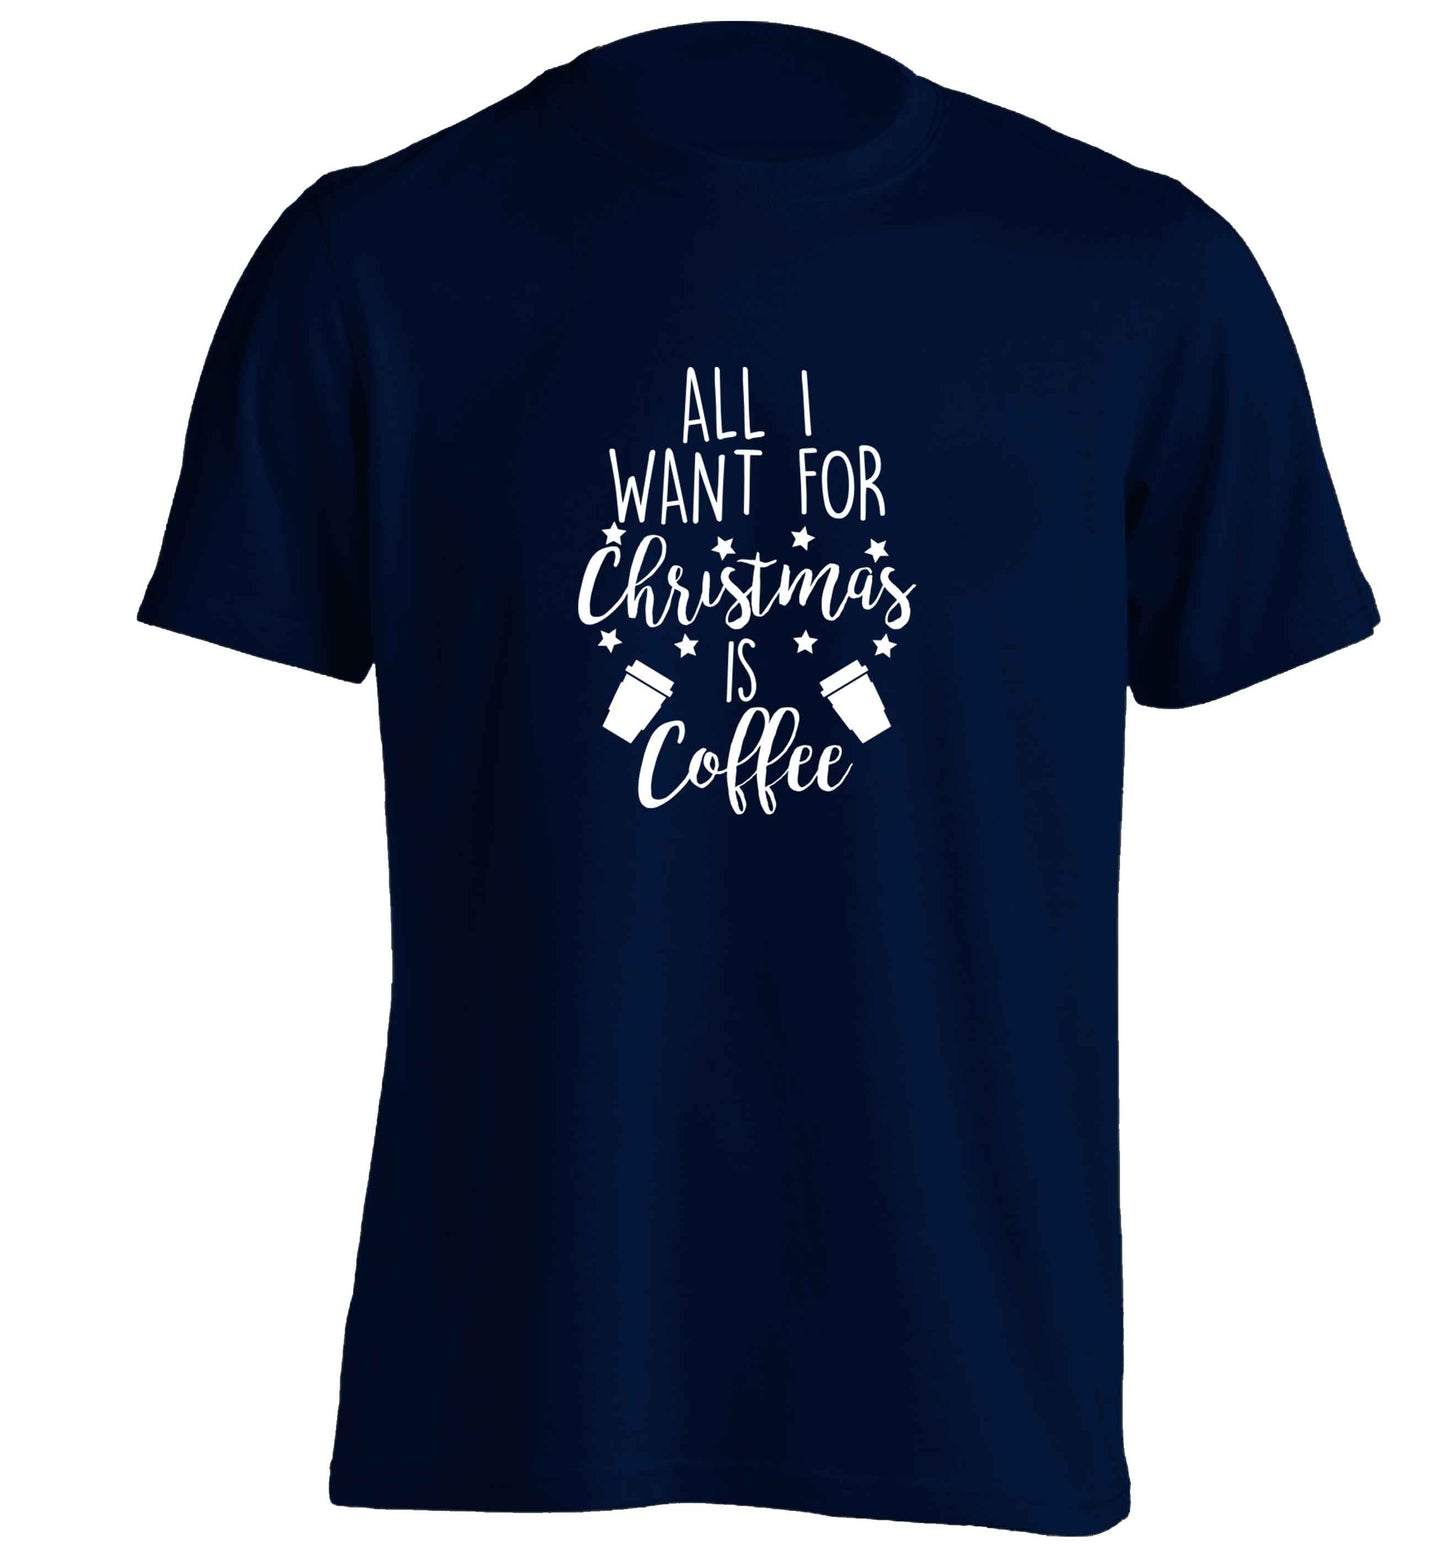 All I want for Christmas is coffee adults unisex navy Tshirt 2XL